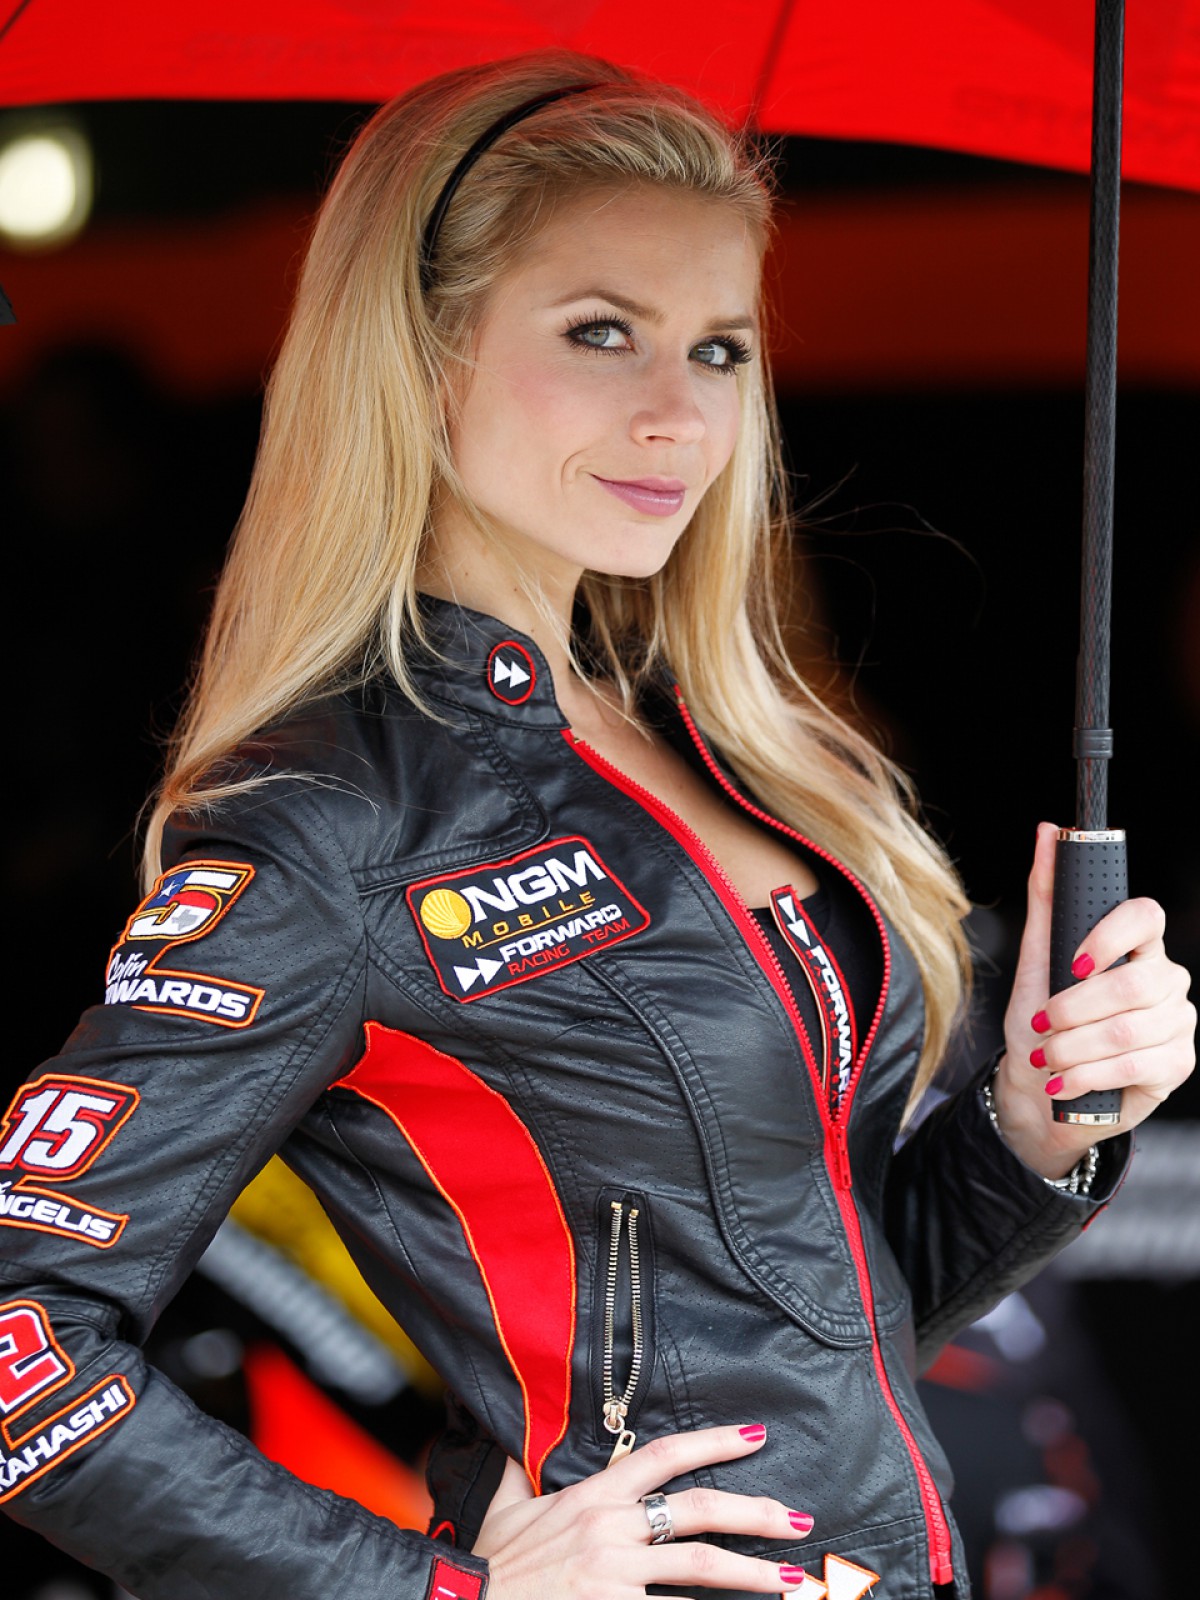 Fine Collection Of Paddock Girls To Race Your Motor Feels Gallery Ebaums World 9754